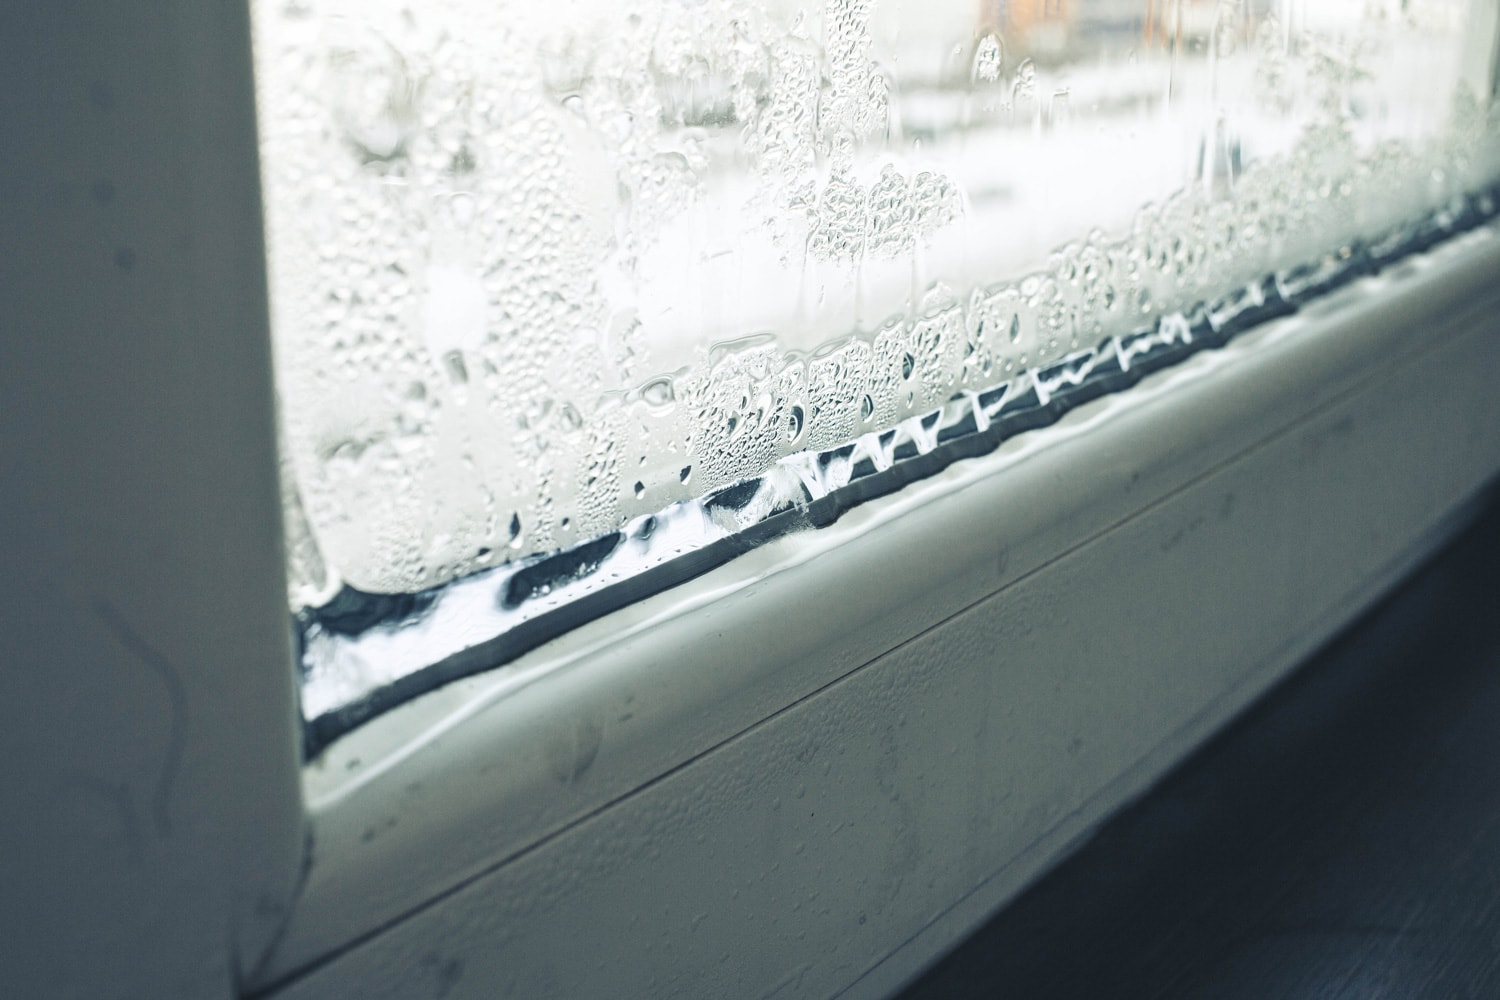 freezing of a plastic window in an apartment, frost on glass, slopes and a window sill, the foreground and background is blurred with a bokeh effect